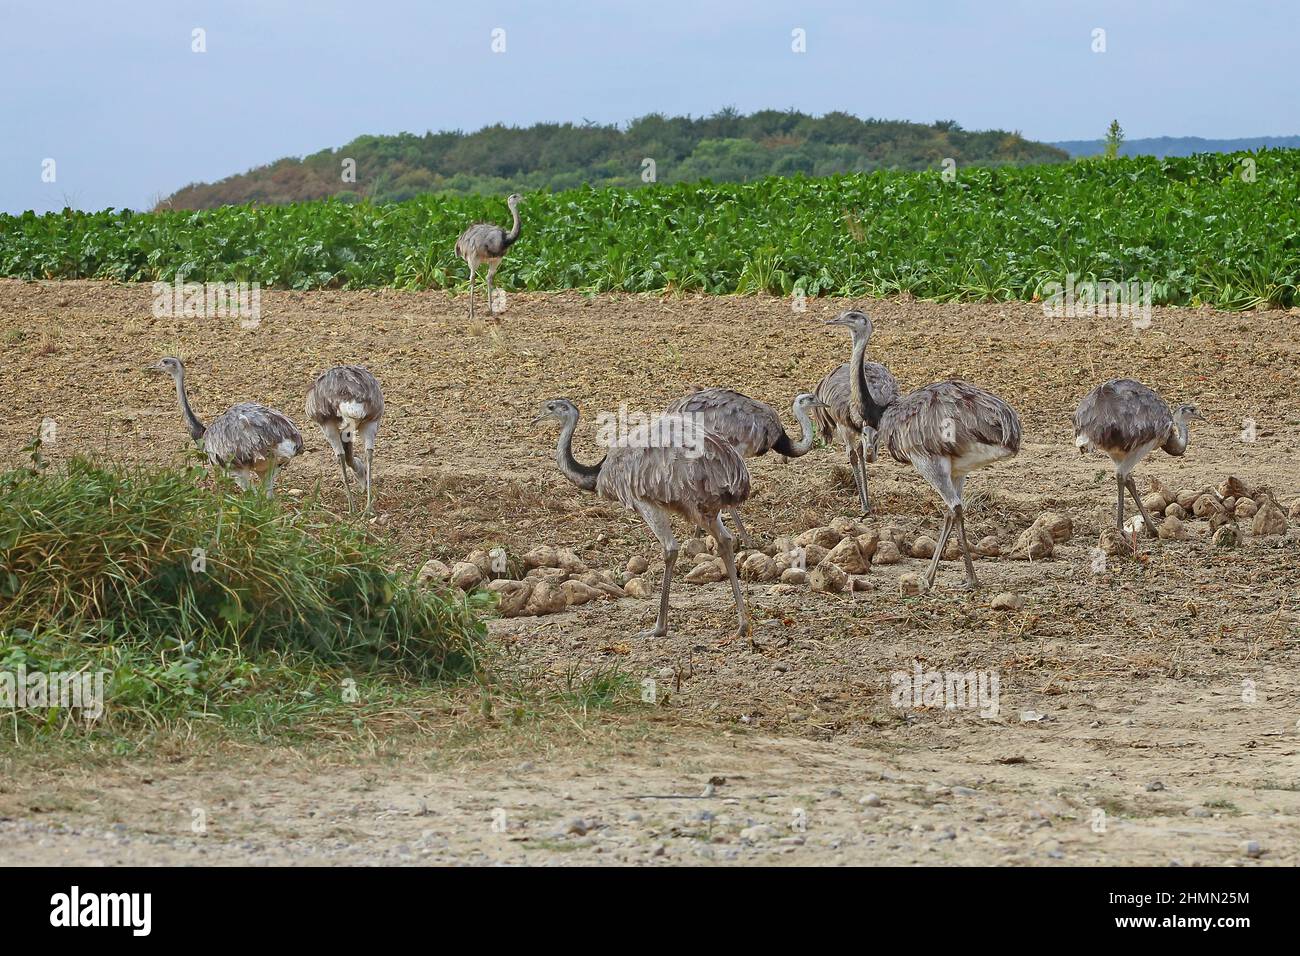 greater rhea (Rhea americana), Adults and juveniles foraging in a field, Germany Stock Photo